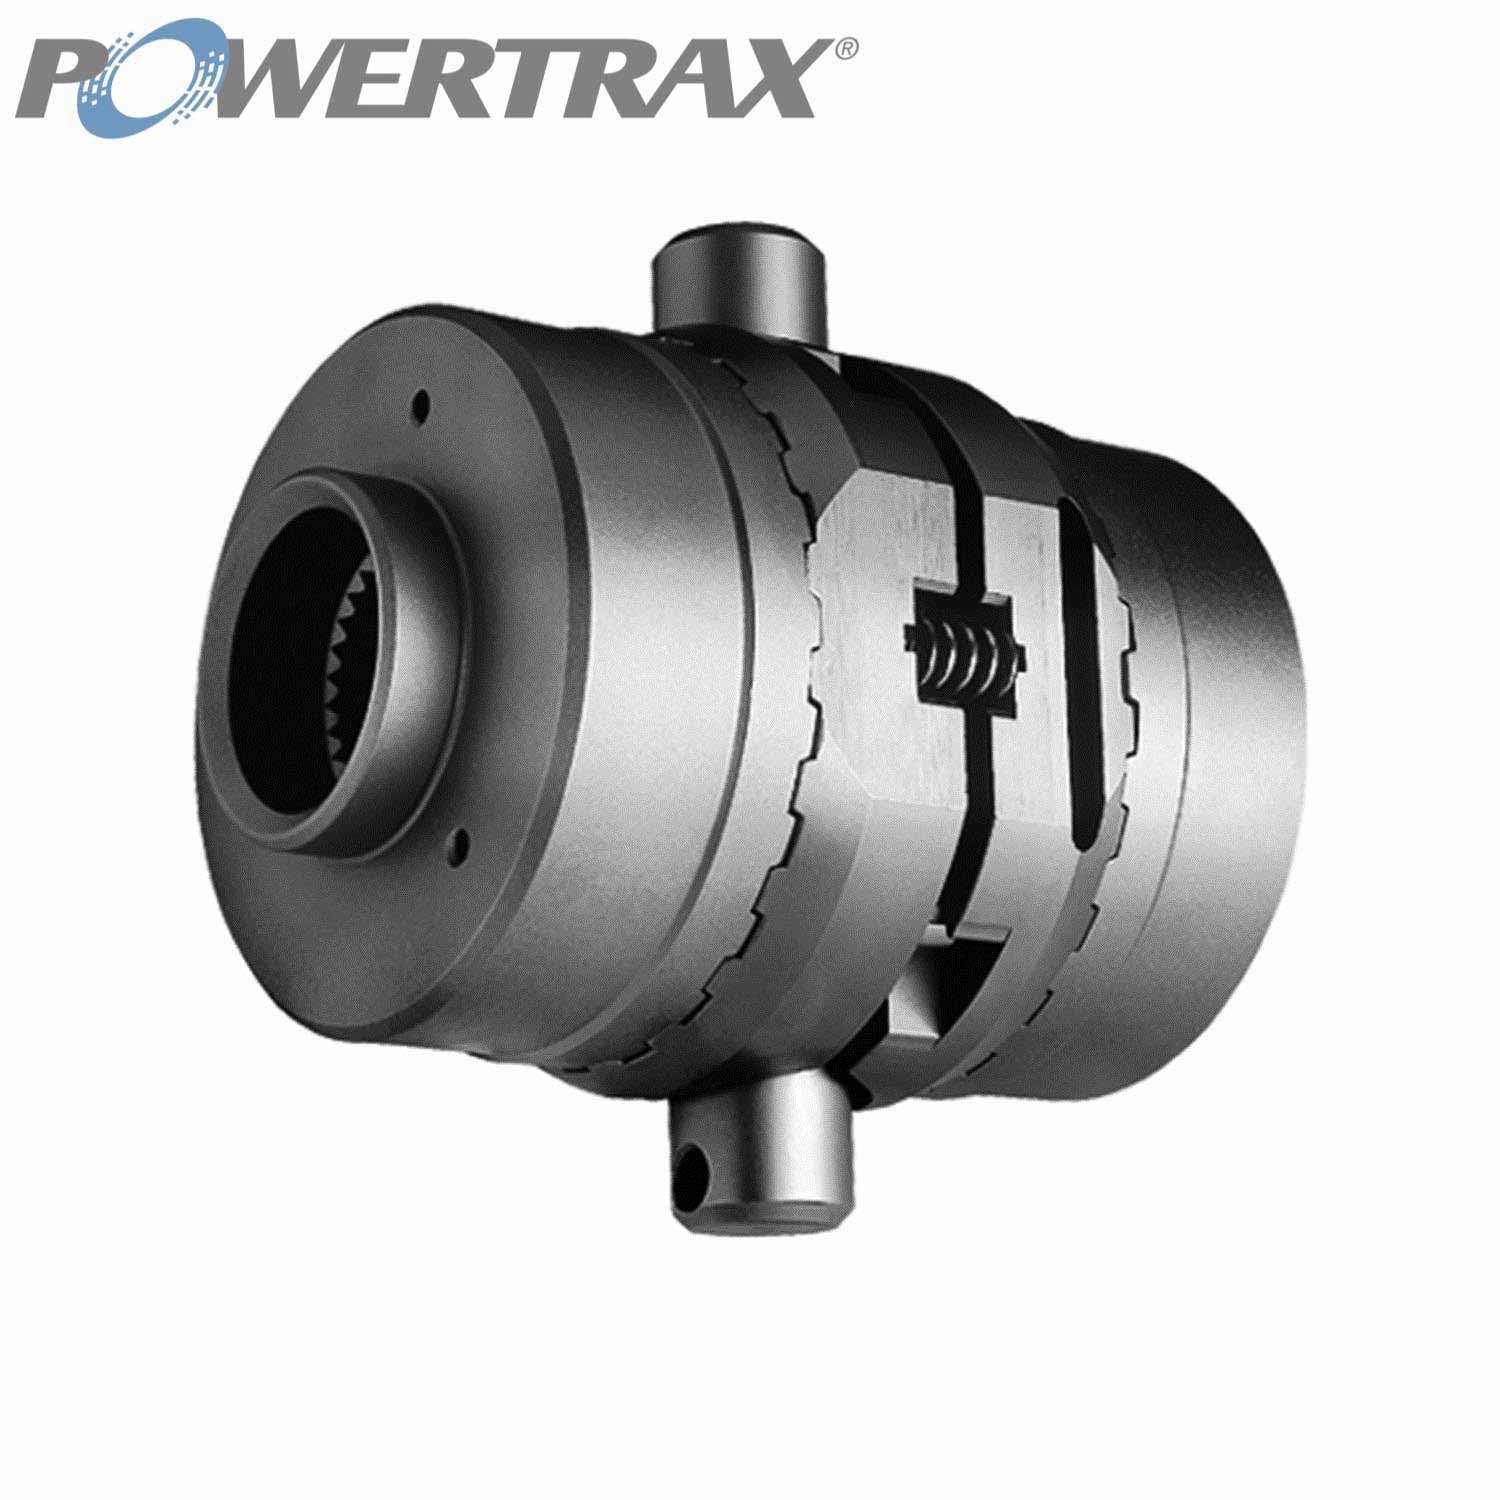 PowerTrax 9220883001 No-Slip Traction System